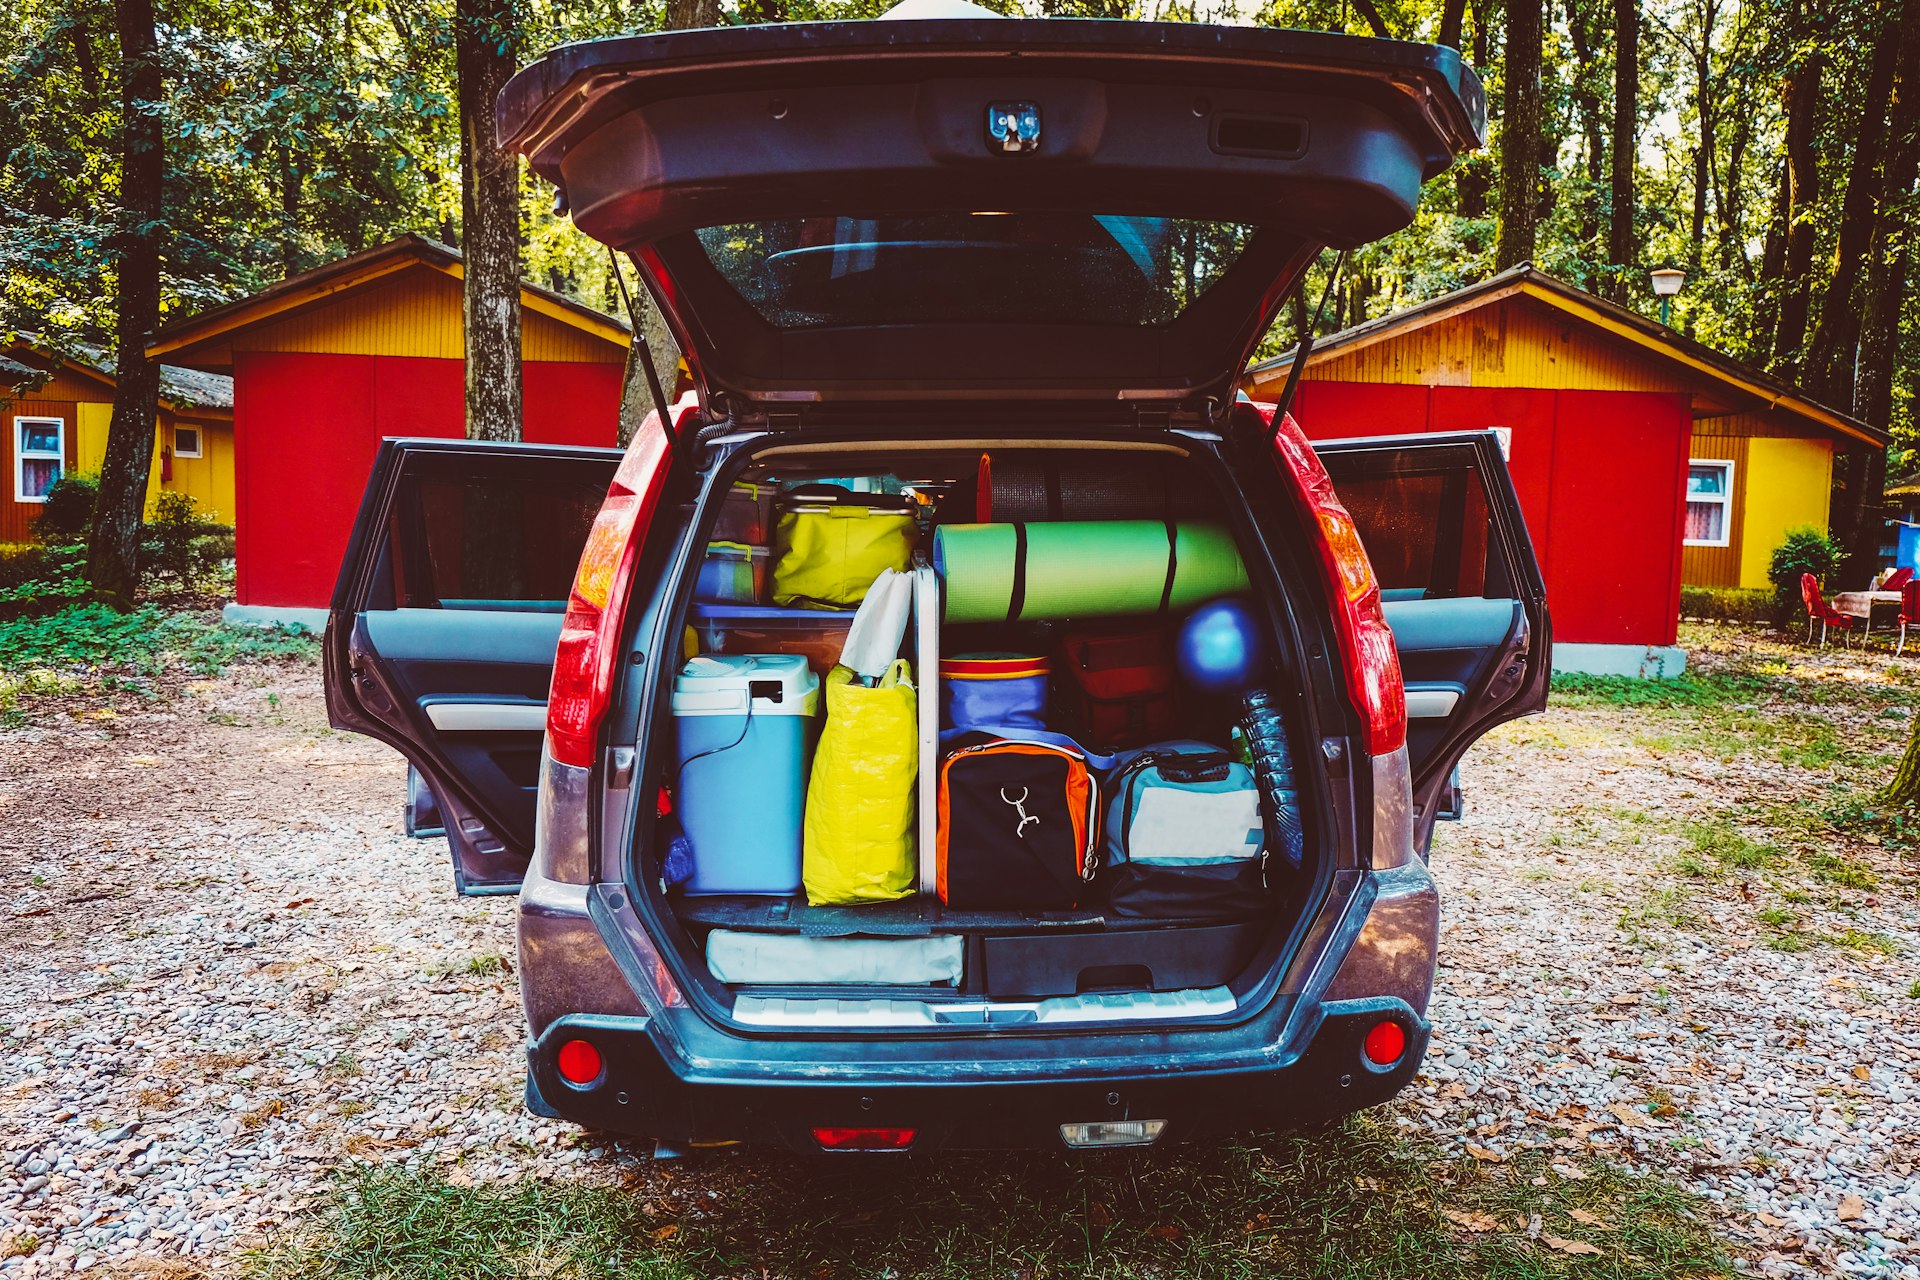 Camping luggage tightly packed into a car trunk in a forest setting. 